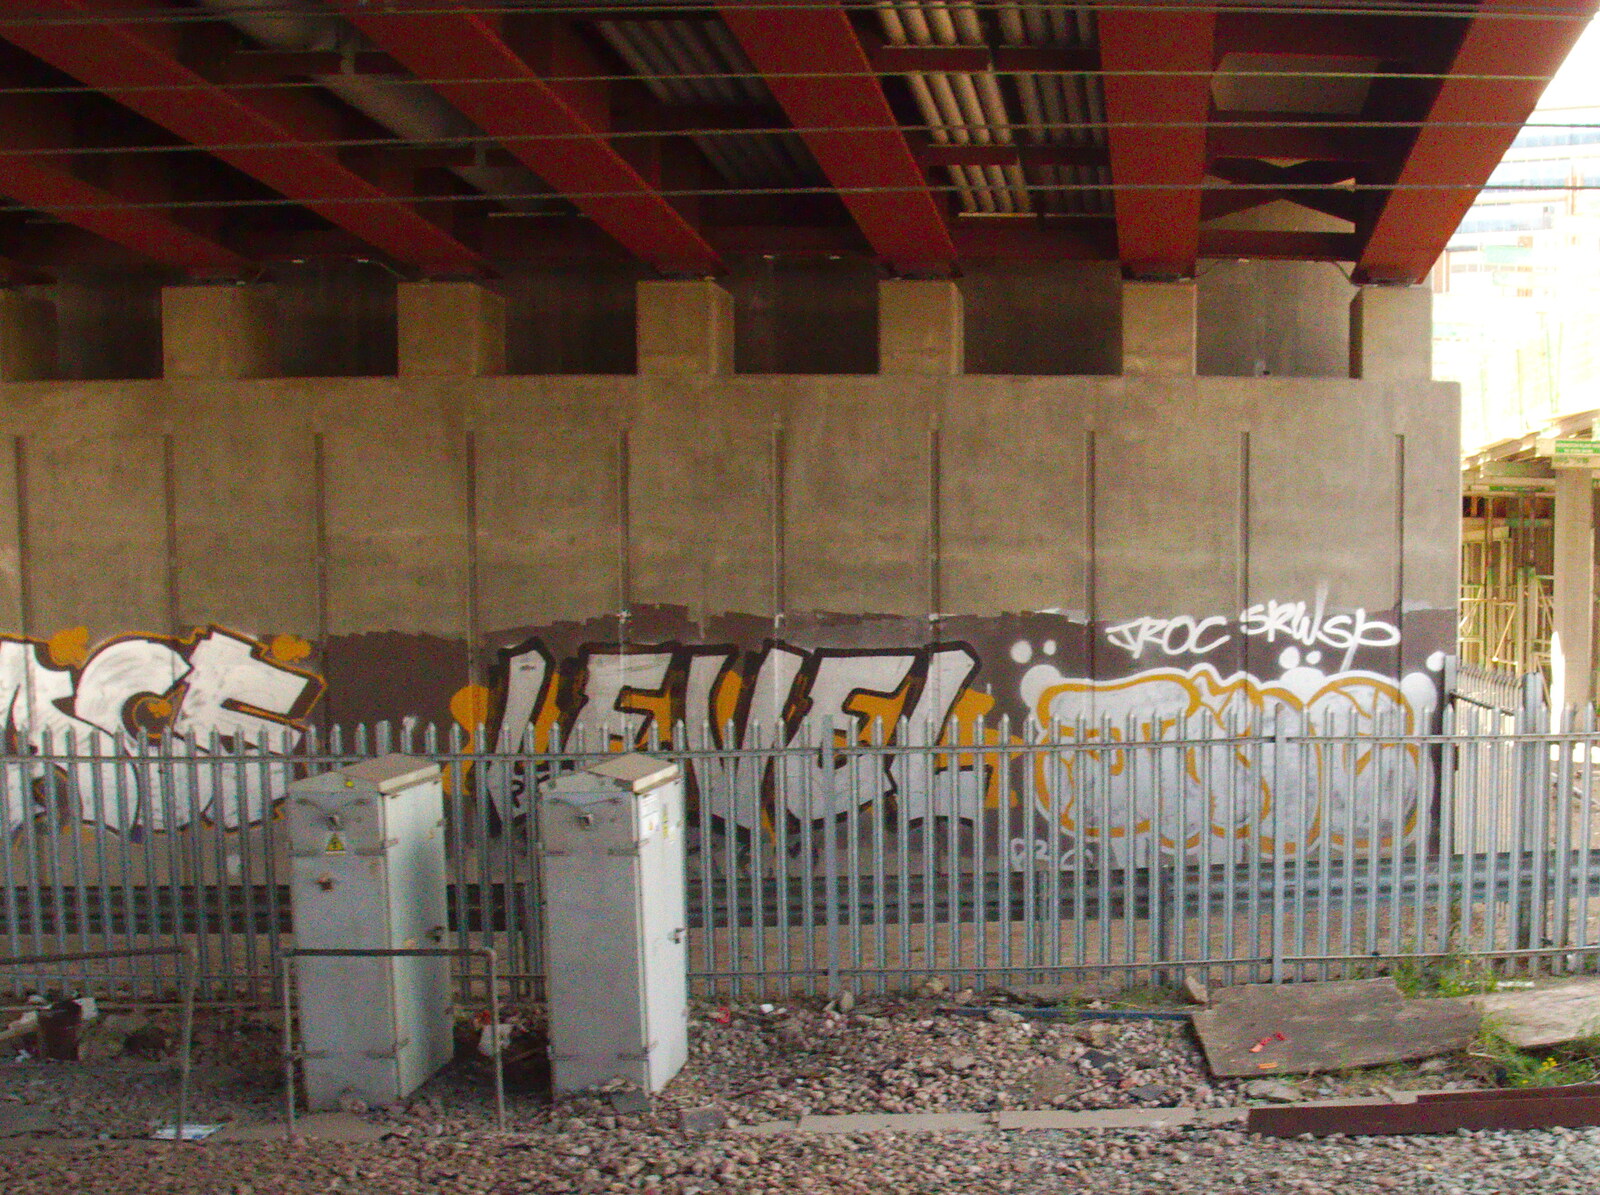 Graffiti under the bridge at Stratford from The BBs at Diss Rugby Club, Bellrope Lane, Roydon, Norfolk - 7th June 2014